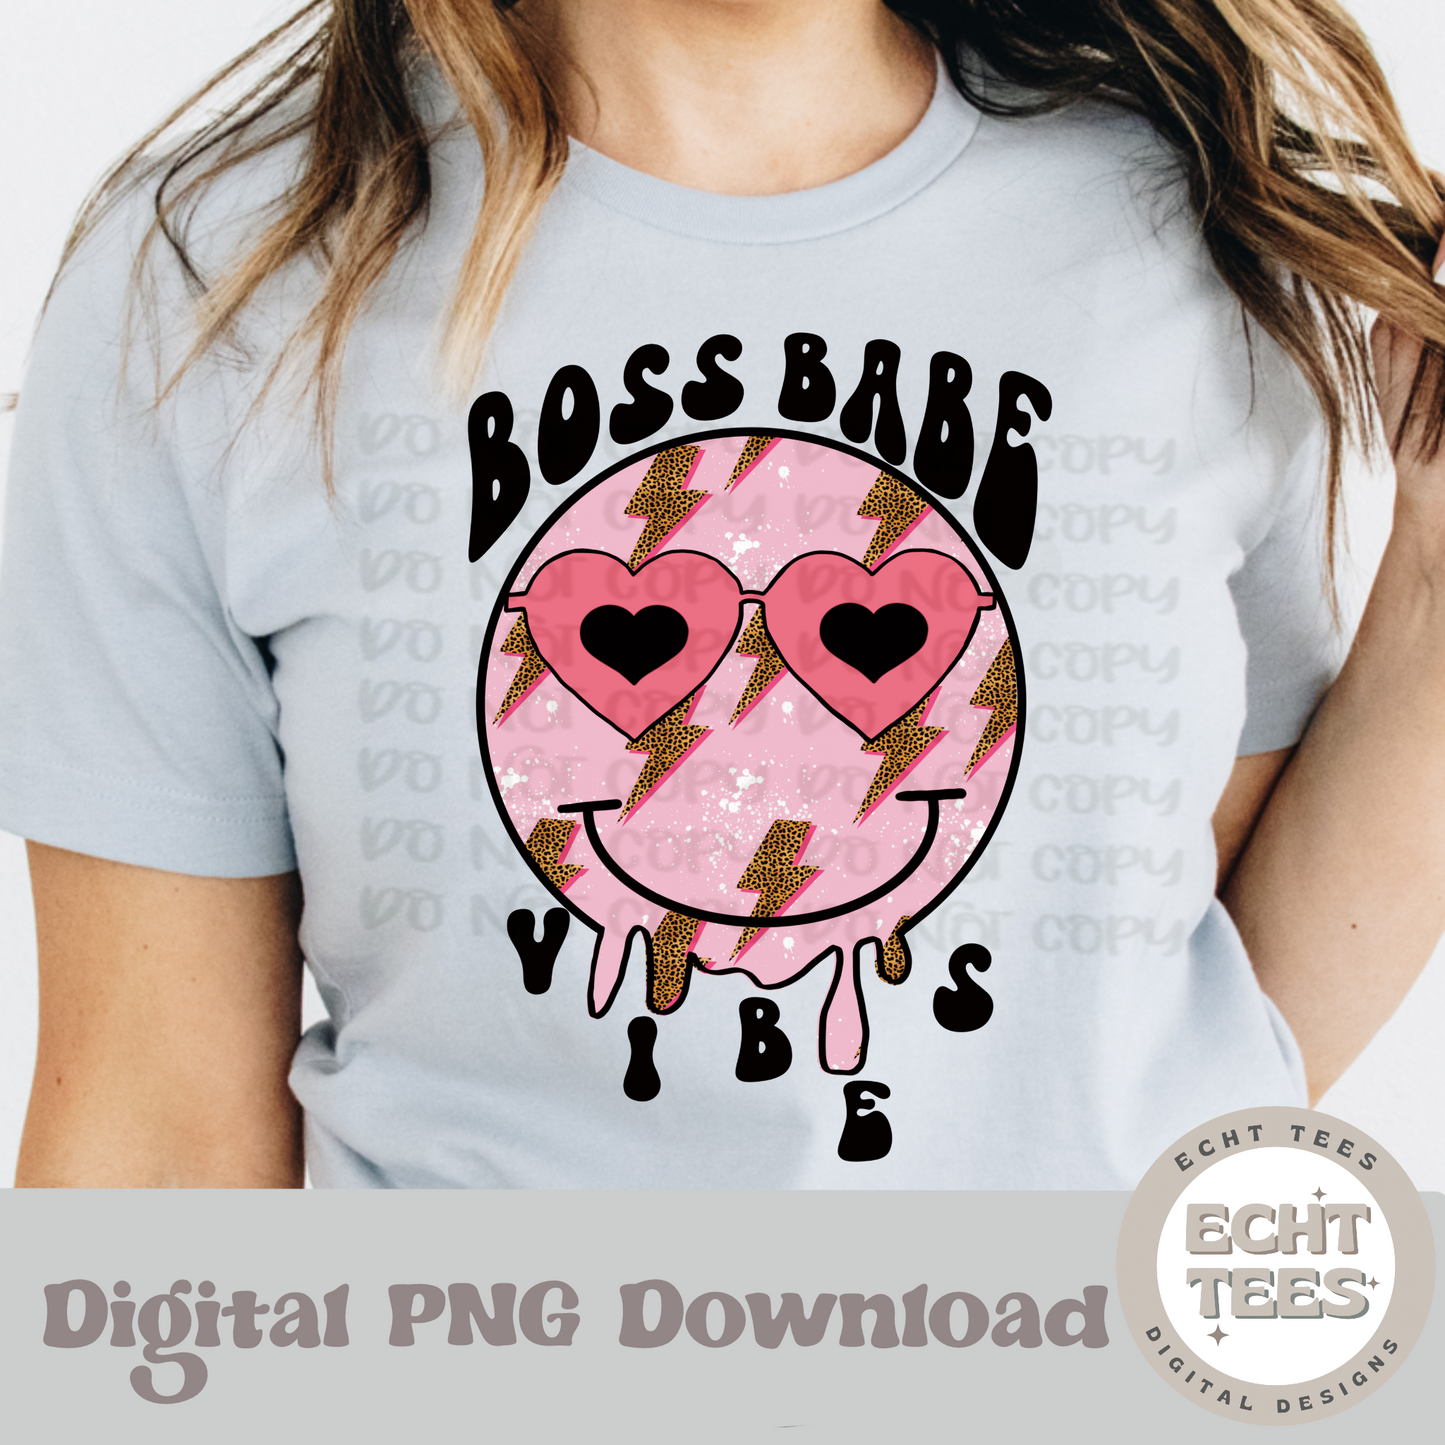 Boss babe vibes PNG Digital Download